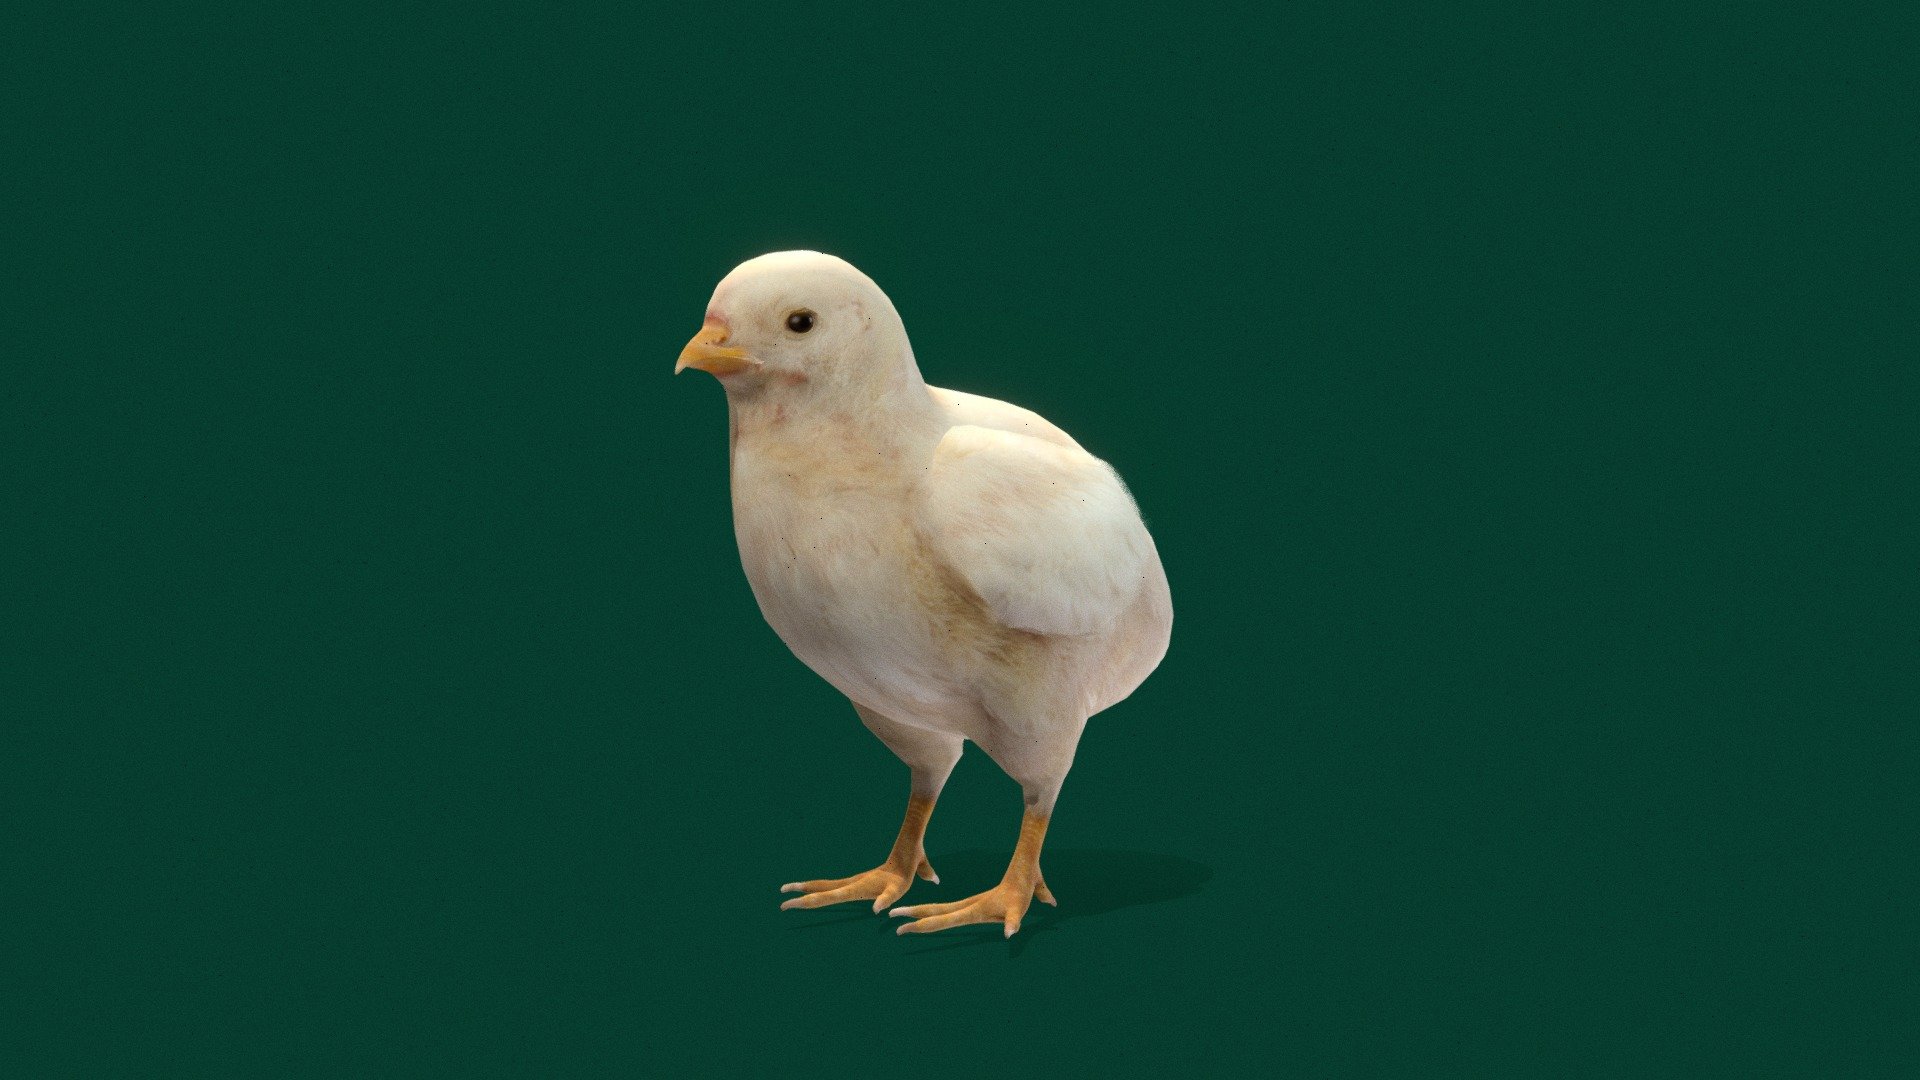 Baby Chicken (Young Chicken) Pullets / Chicks 

‎Gallus gallus domesticus Domesticated Capon ( Birds )

1 Draw Calls

GameReady 

8 Animations

4K PBR Textures Material

Unreal FBX

Unity FBX  

Blend File 

USDZ File (AR Ready). Real Scale Dimension

Textures Files

GLB File


Gltf File ( Spark AR, Lens Studio(SnapChat) , Effector(Tiktok) , Spline, Play Canvas ) Compatible




Triangles : 7588



Vertices  : 3831

Faces     : 5224 

Edges     : 9046

Diffuse , Metallic, Roughness , Normal Map ,Specular Map,AO

Chicks are baby chickens! Baby chickens are called chicks, 3 month old females are called pullets (until they start laying eggs around 6 months), adult females who lay eggs are hens, and males are roosters, cocks, or cockerels.
The chicken is a domesticated species that arose from the red junglefowl, originally from India. They have also partially hybridized with other wild species of junglefowl 3d model